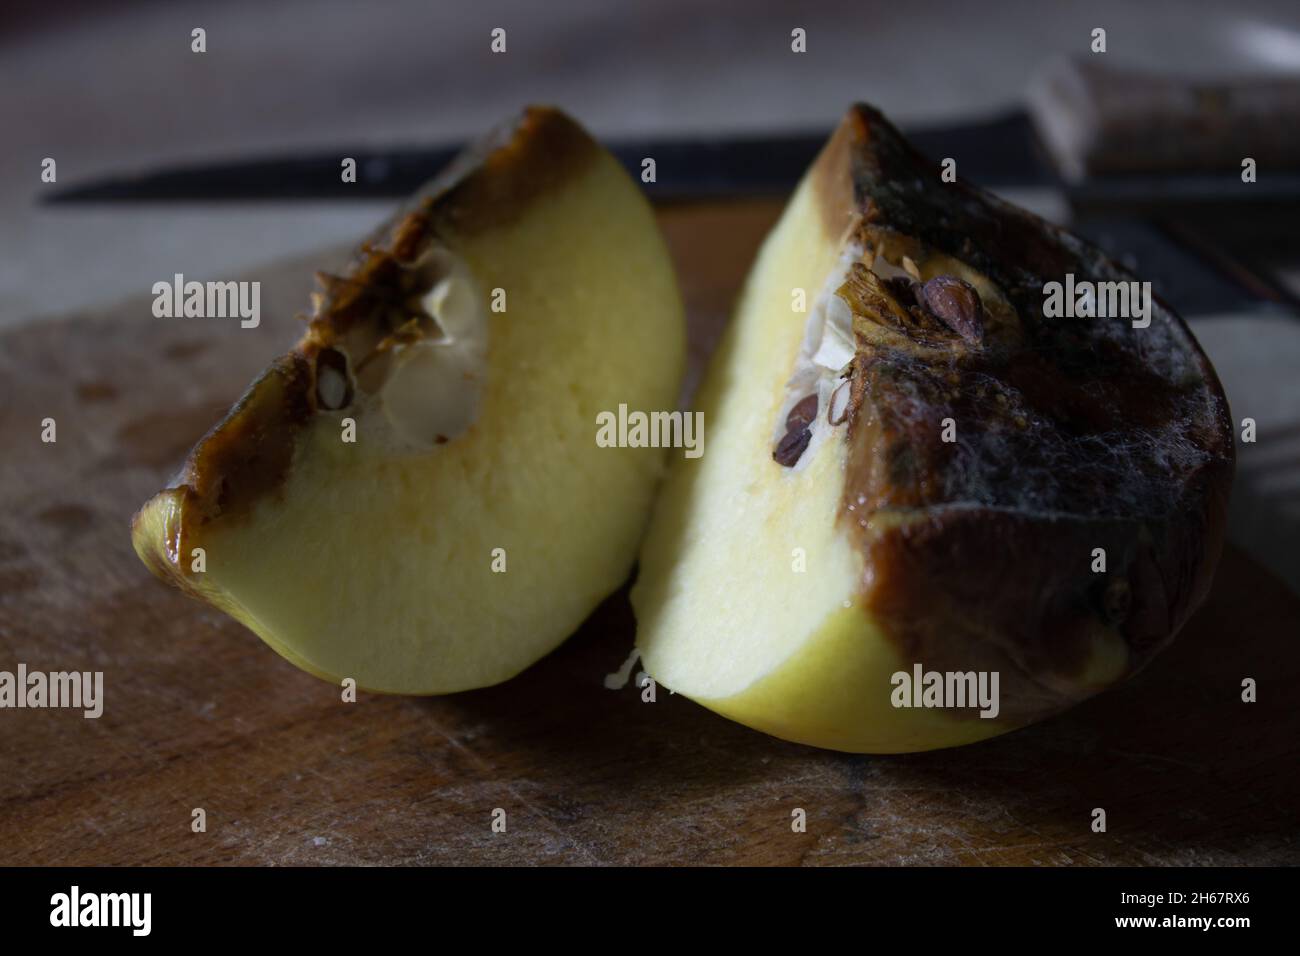 A moldy quince on a wooden cutting board with knife and fork at the side of it. Stock Photo